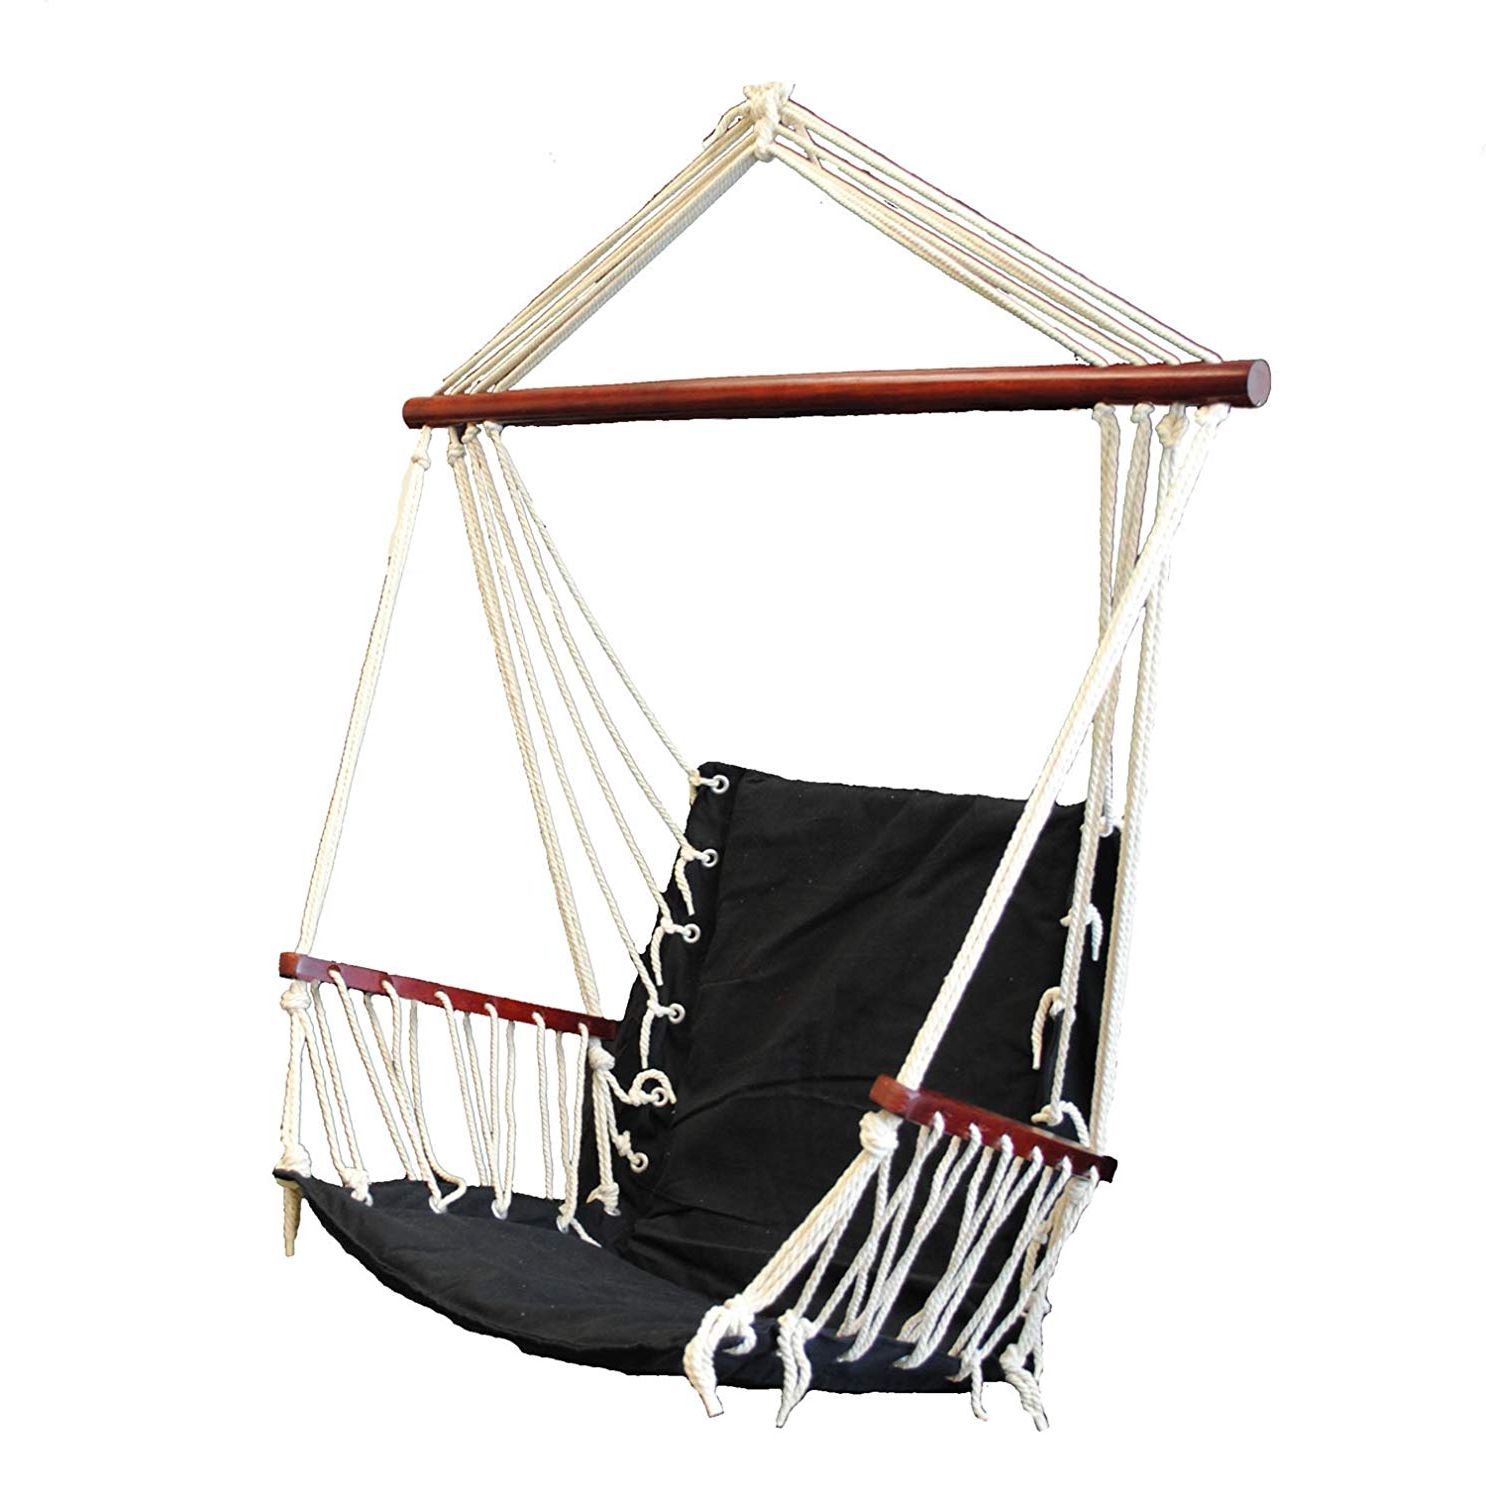 2019 Cotton Porch Swings Throughout Omni Patio Swing Seat Hanging Hammock Cotton Rope Chair With Cushion Seat  (red) (View 12 of 30)